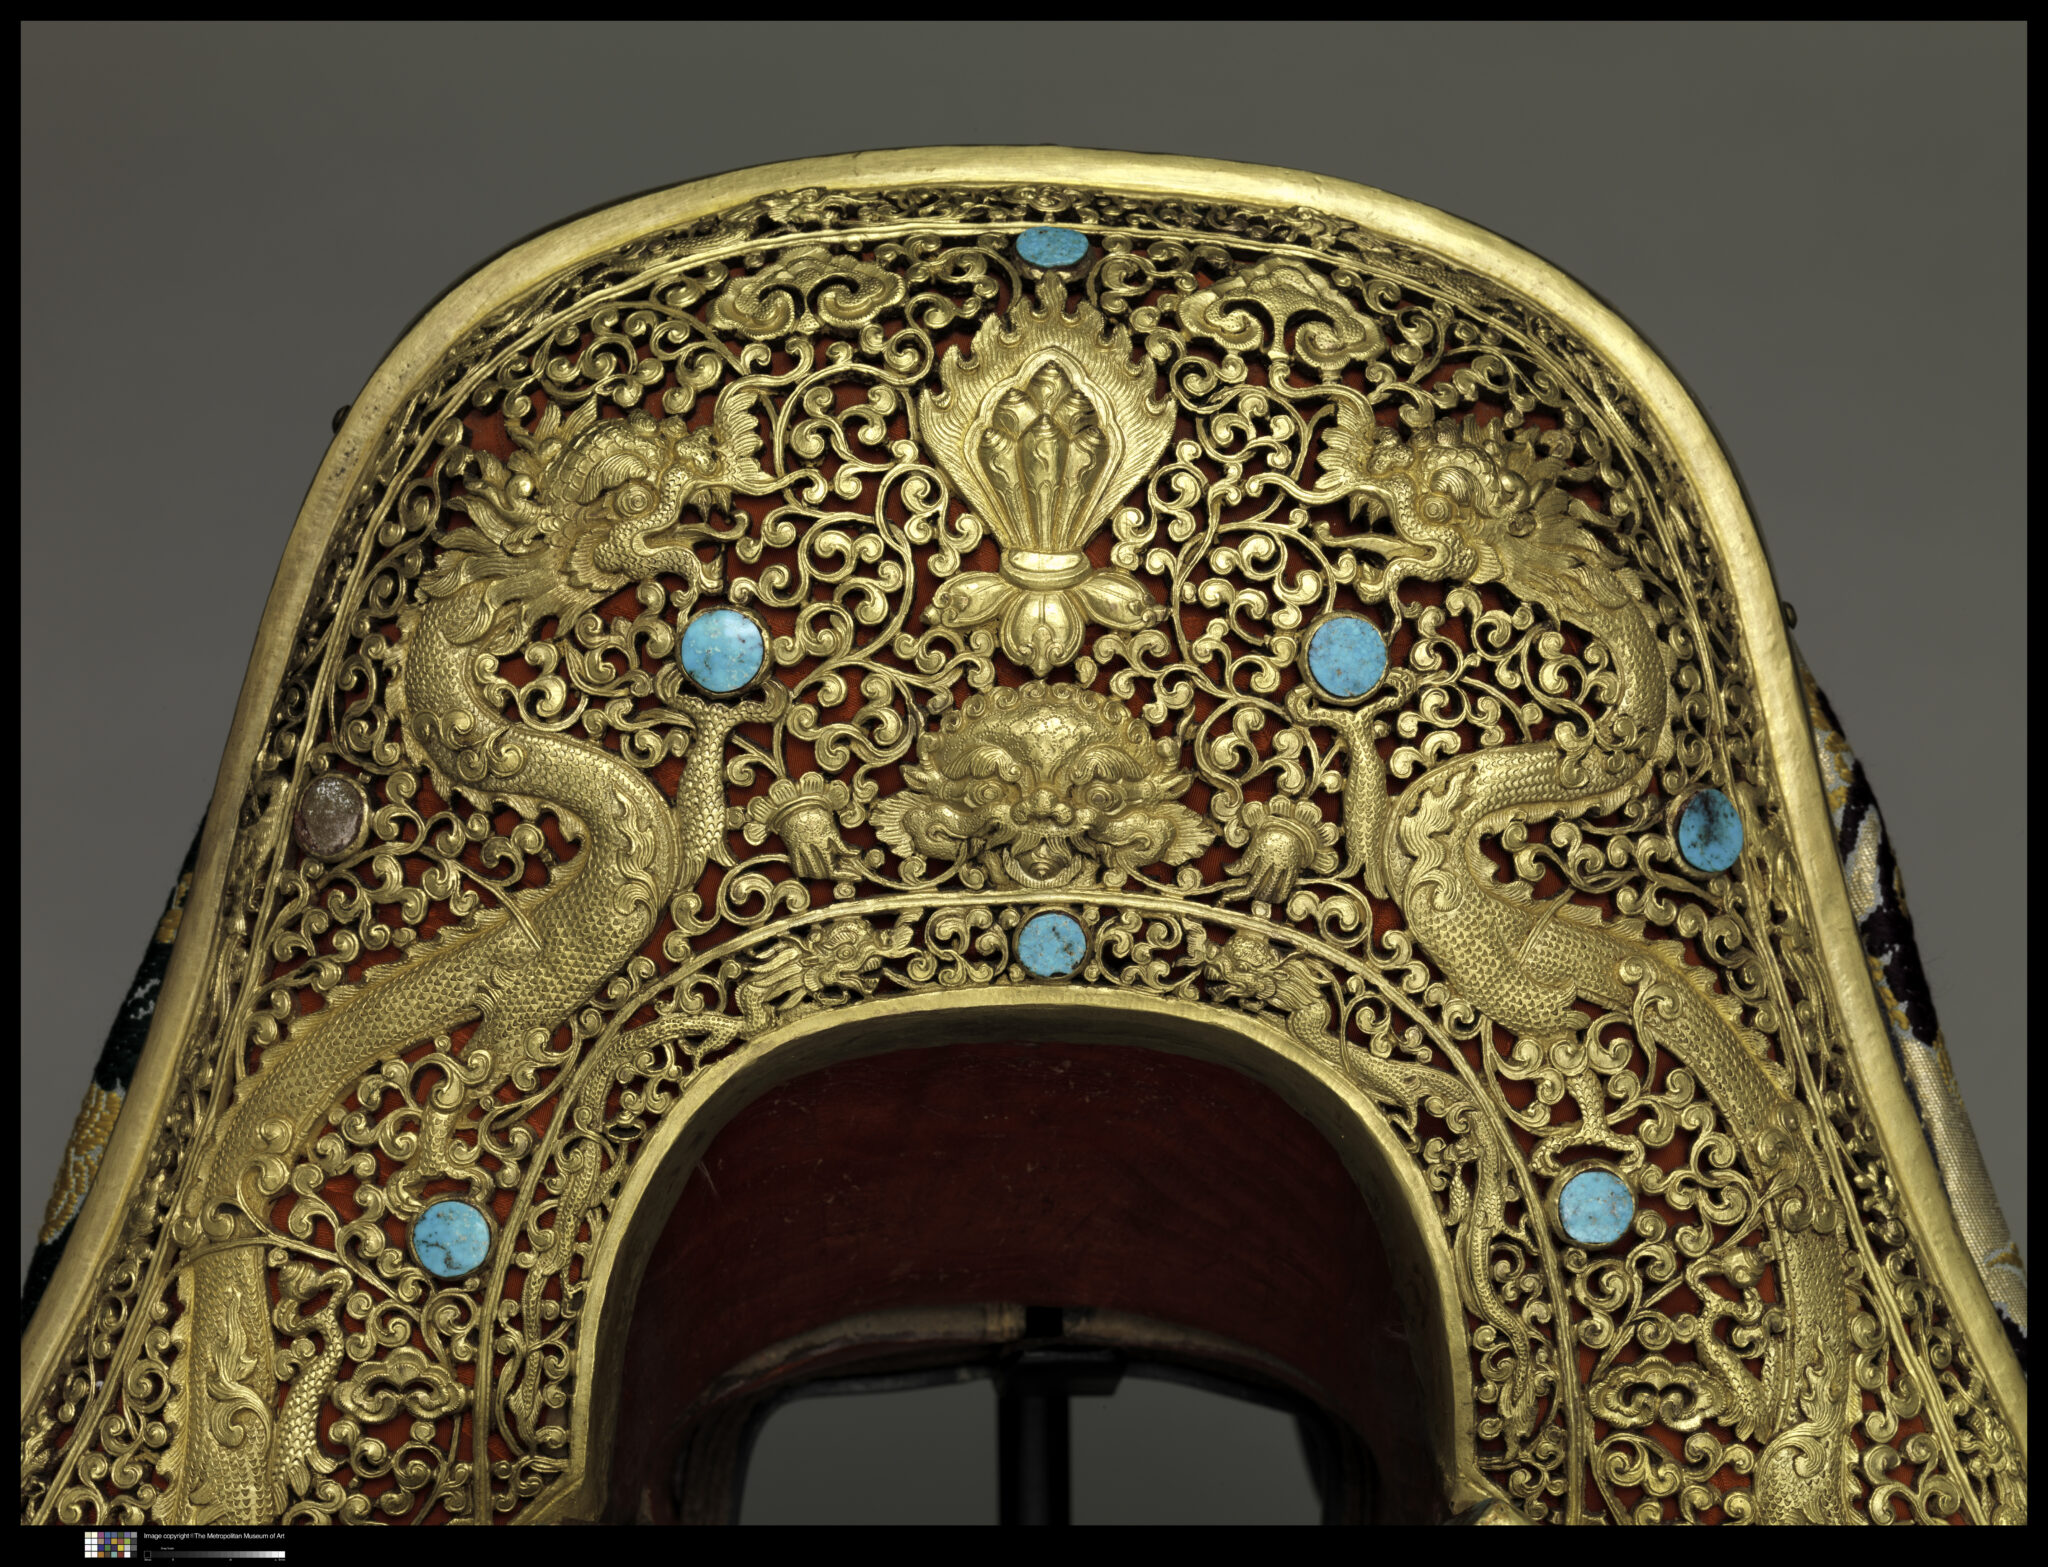 Decoration on front saddle plate depicting dragons writhing and twisting through field of golden filigree scrollwork